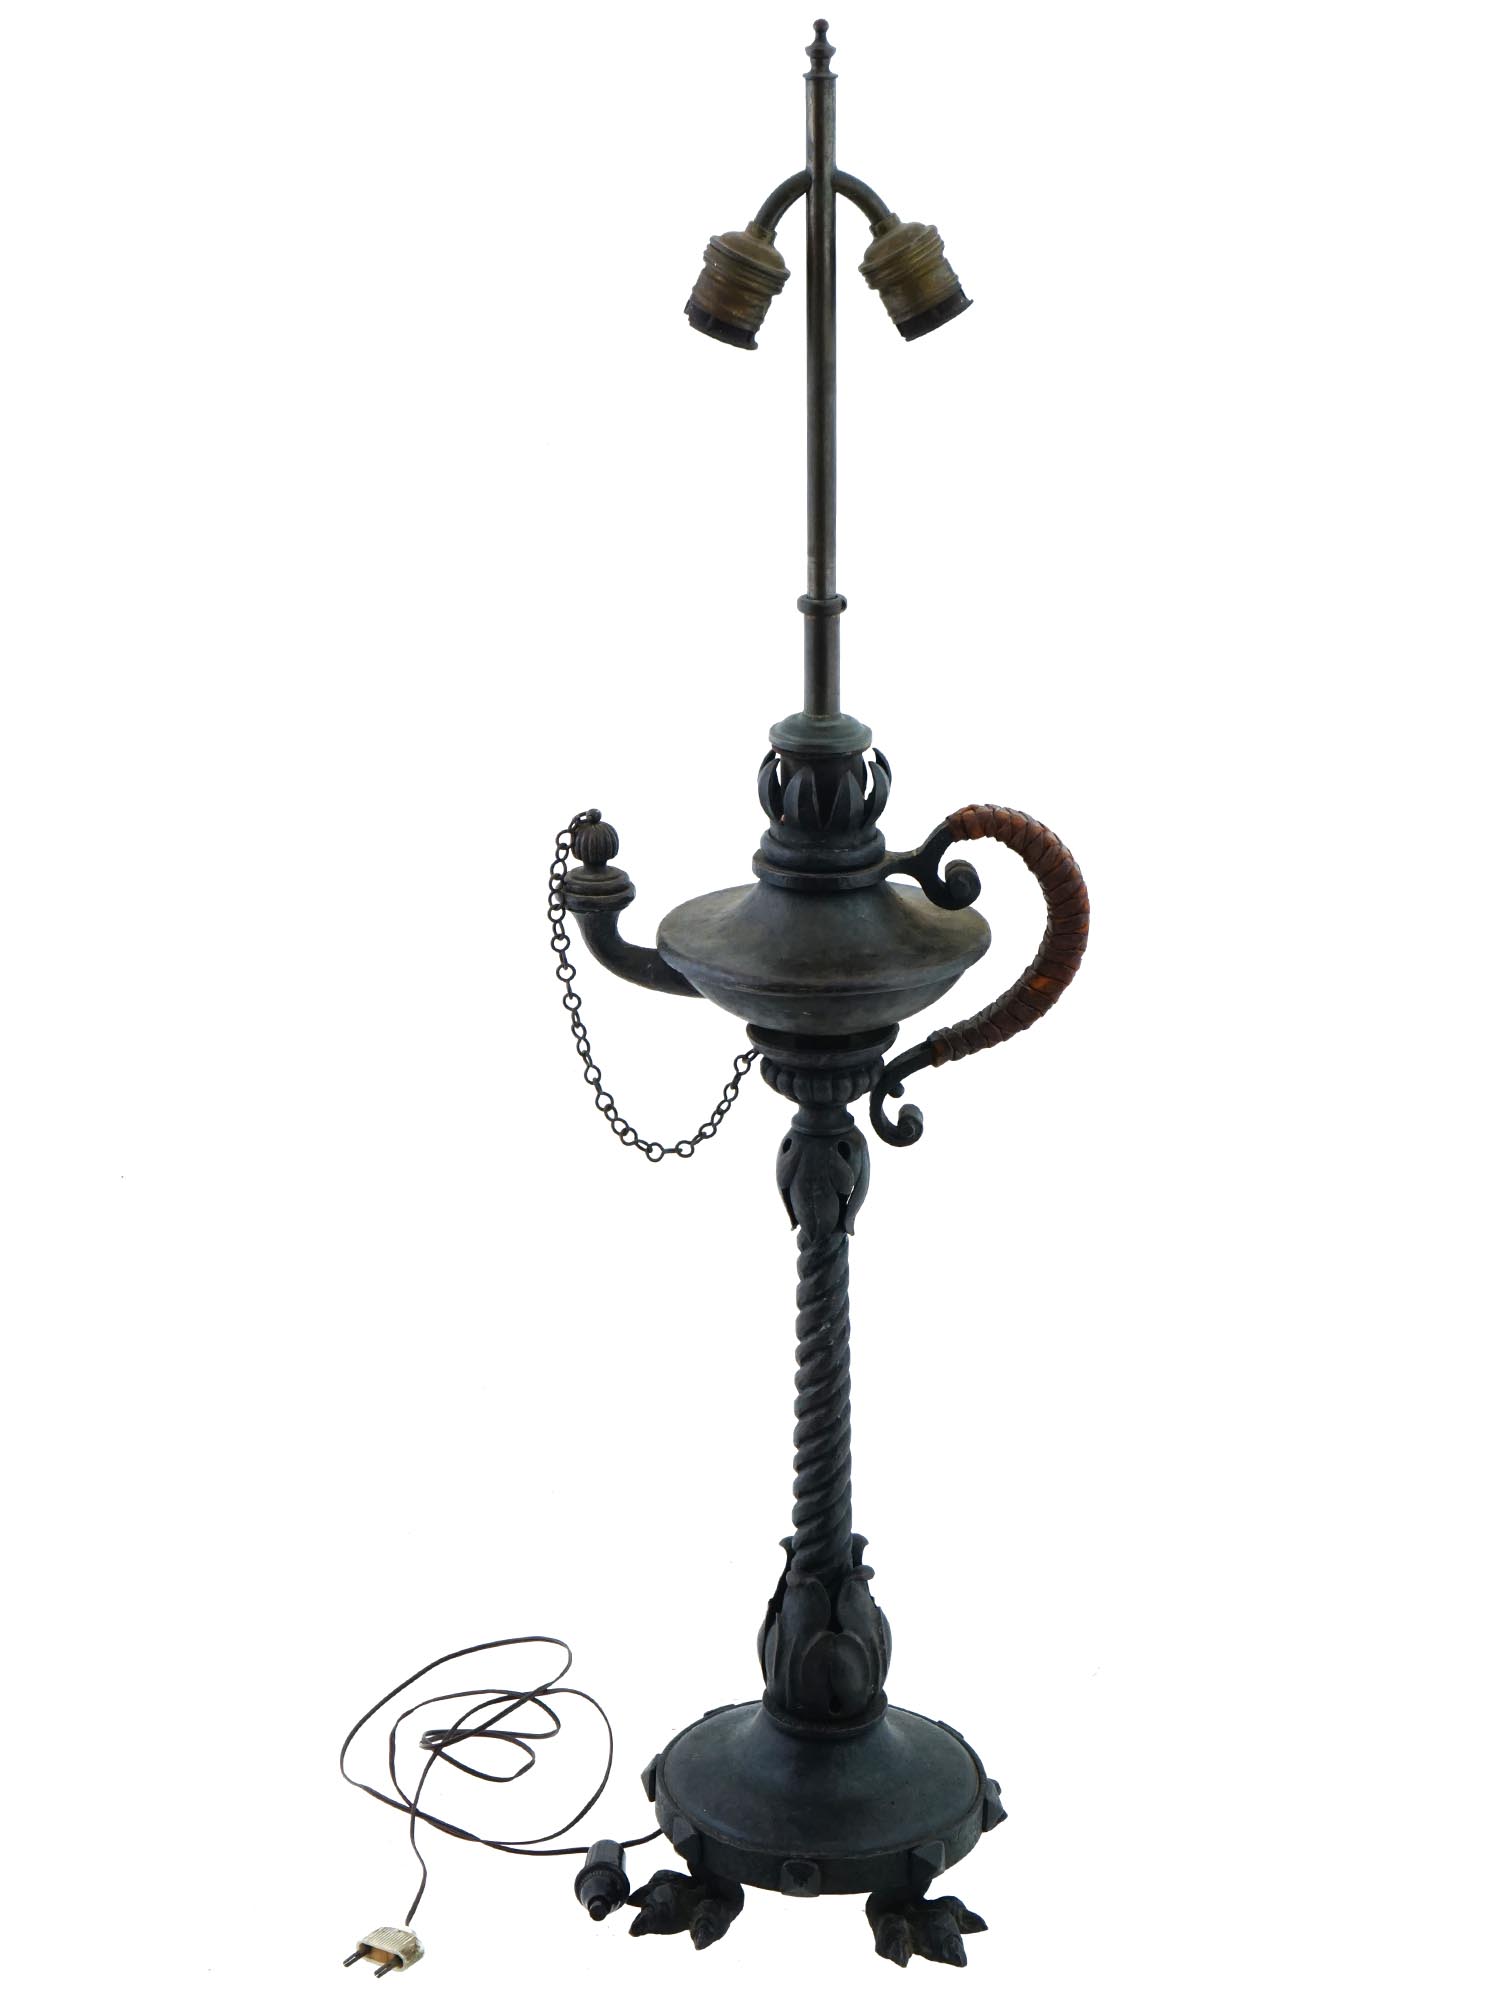 ANTIQUE WROUGHT IRON TABLE LAMP BY JOSE THENEE PIC-1